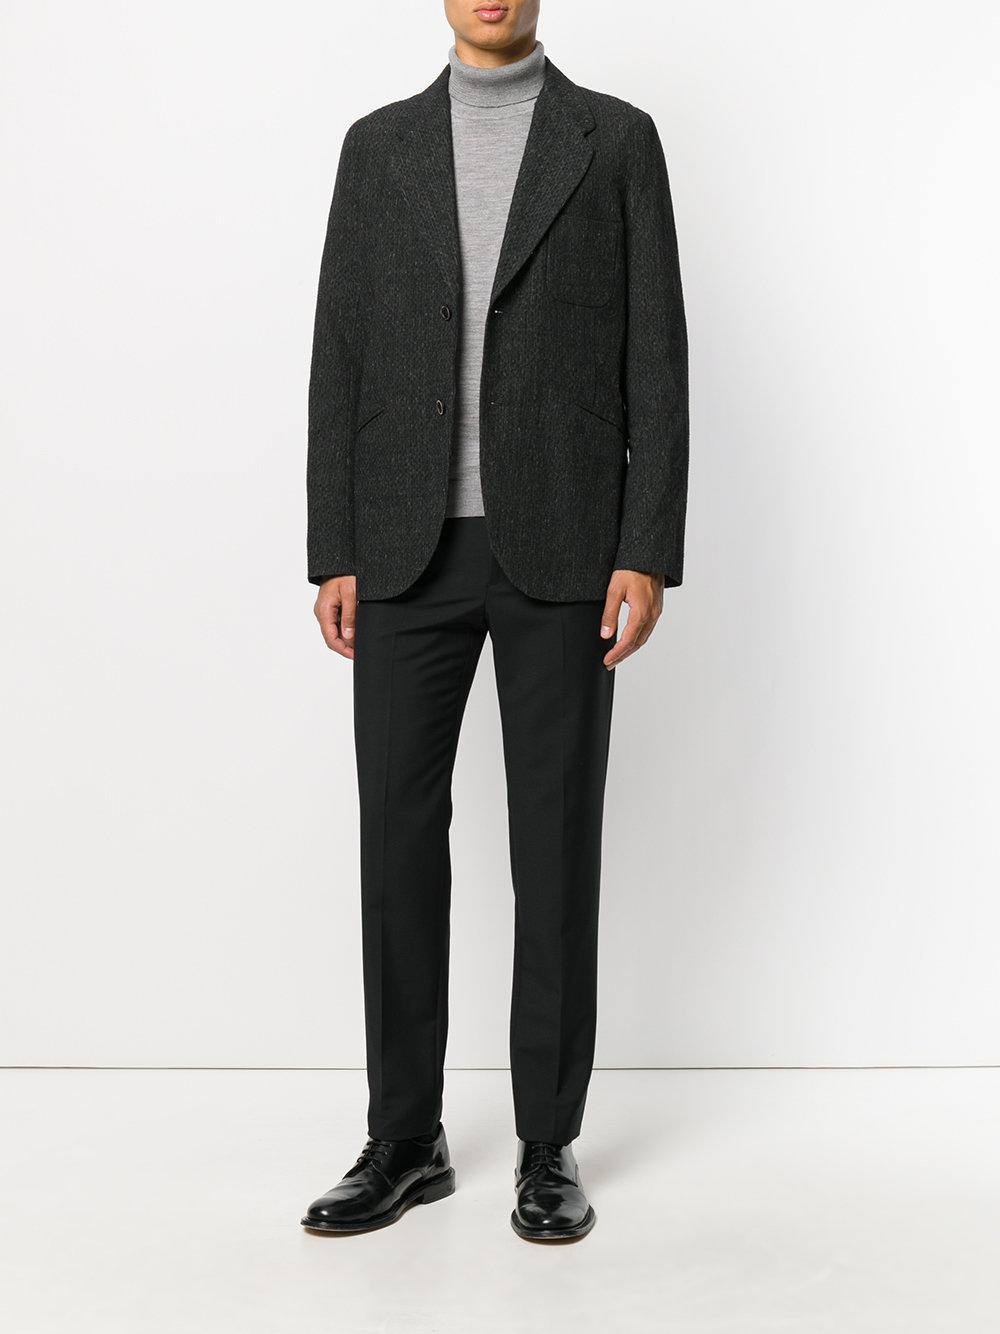 Lyst - Uma Wang Tailored Jacket in Gray for Men